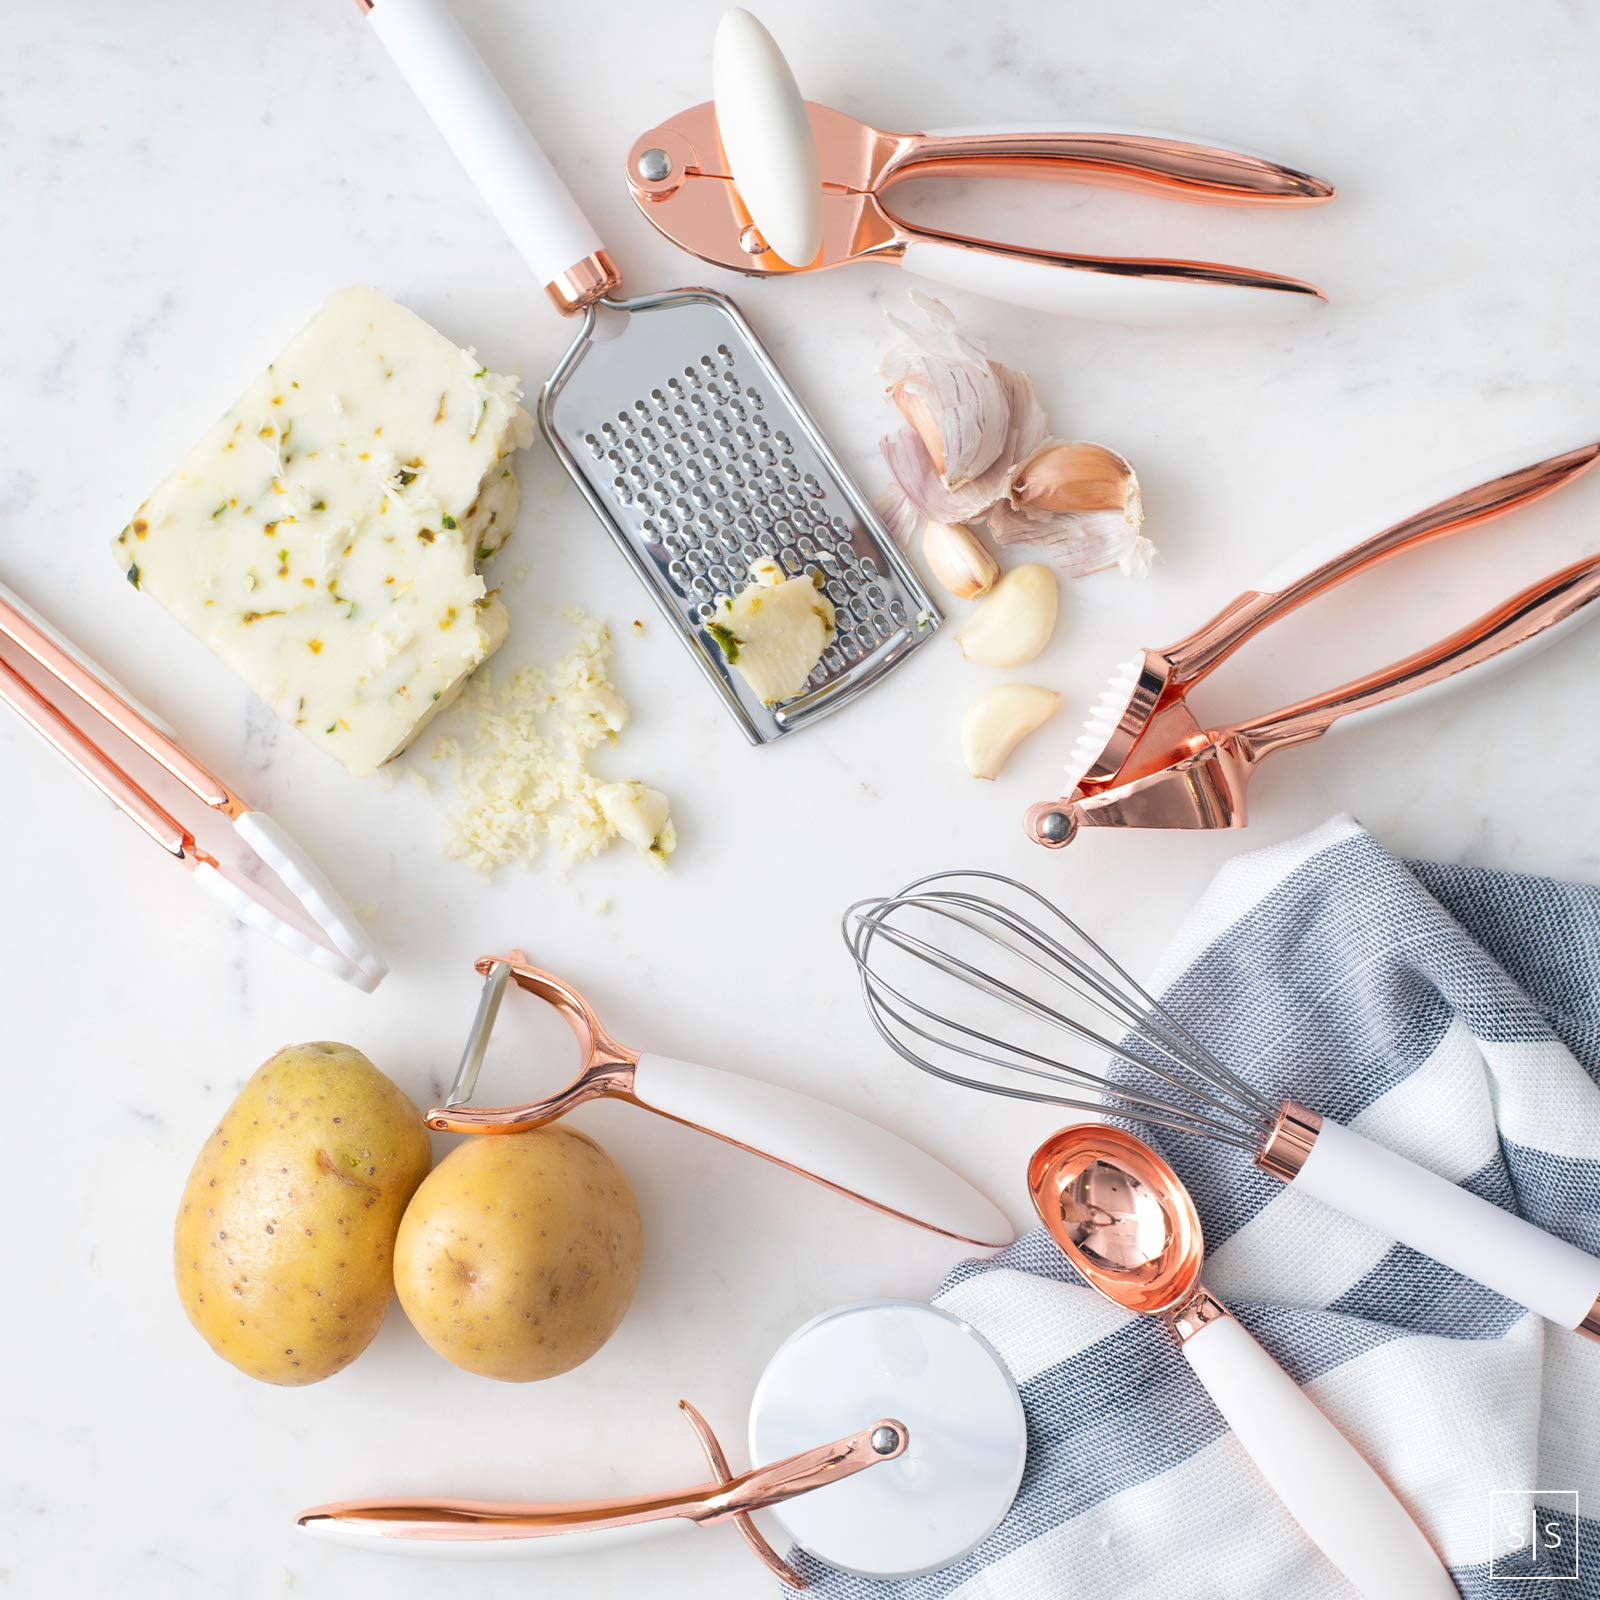 White & Gold Kitchen Tools and Gadgets - Luxe